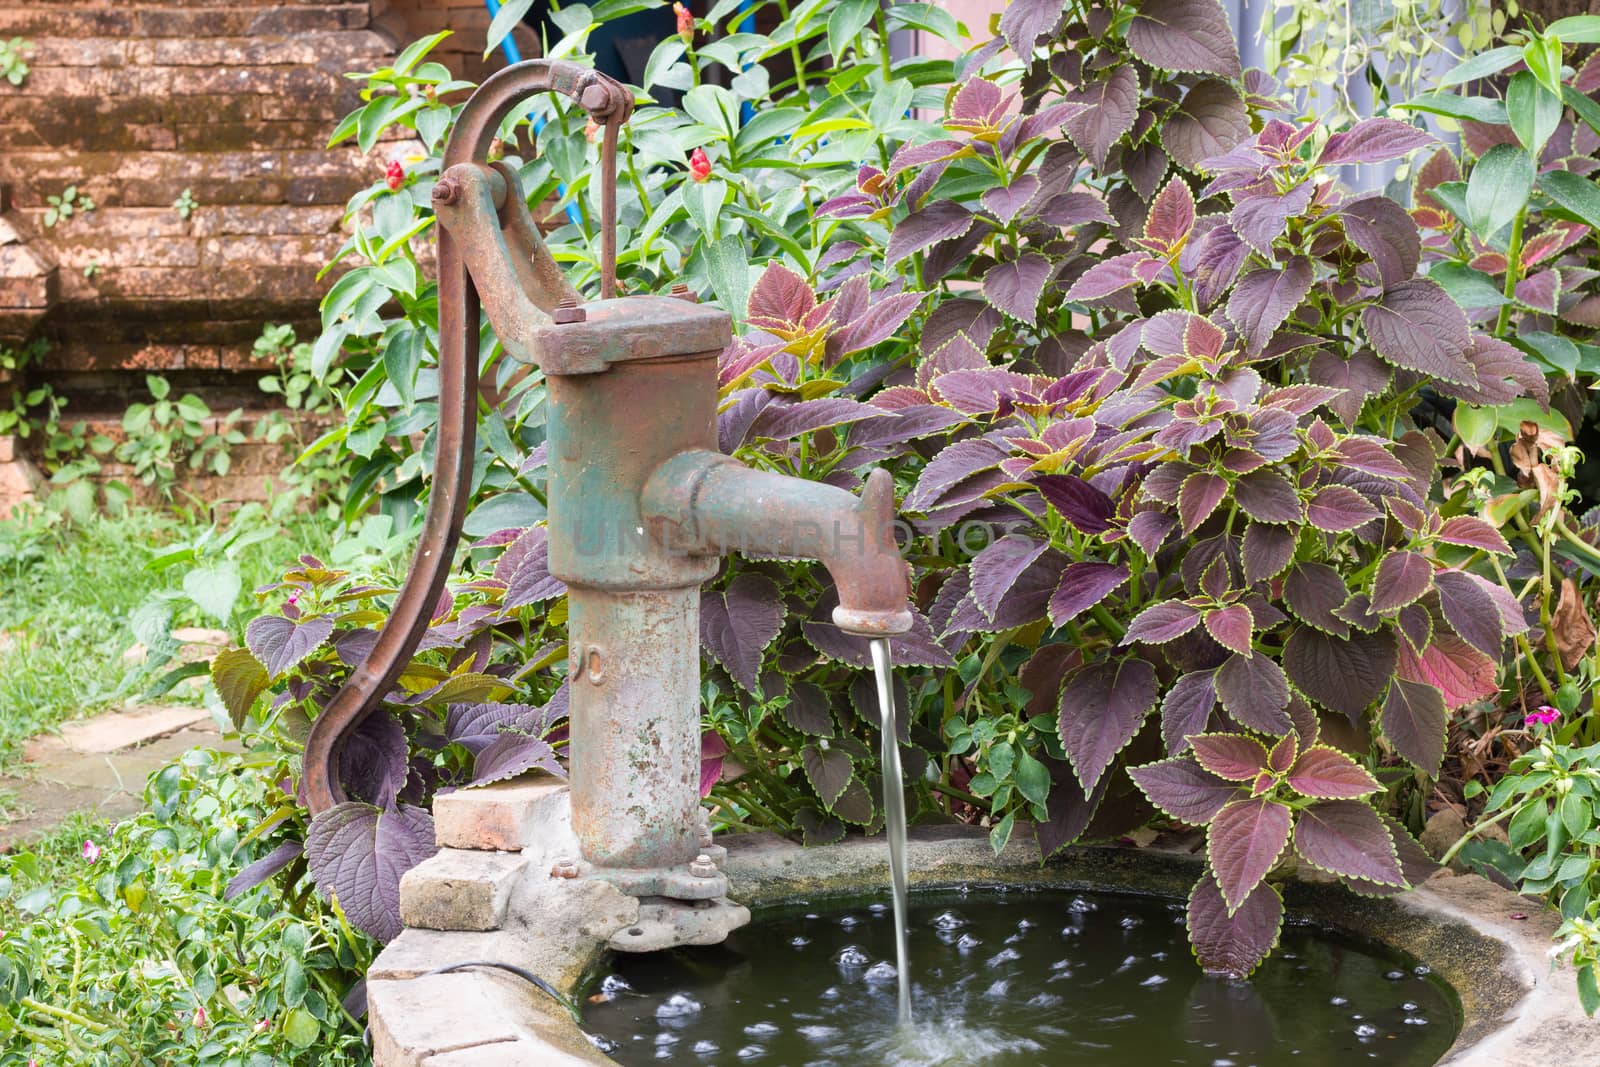 An old fashioned hand water pump above old water well, with plants